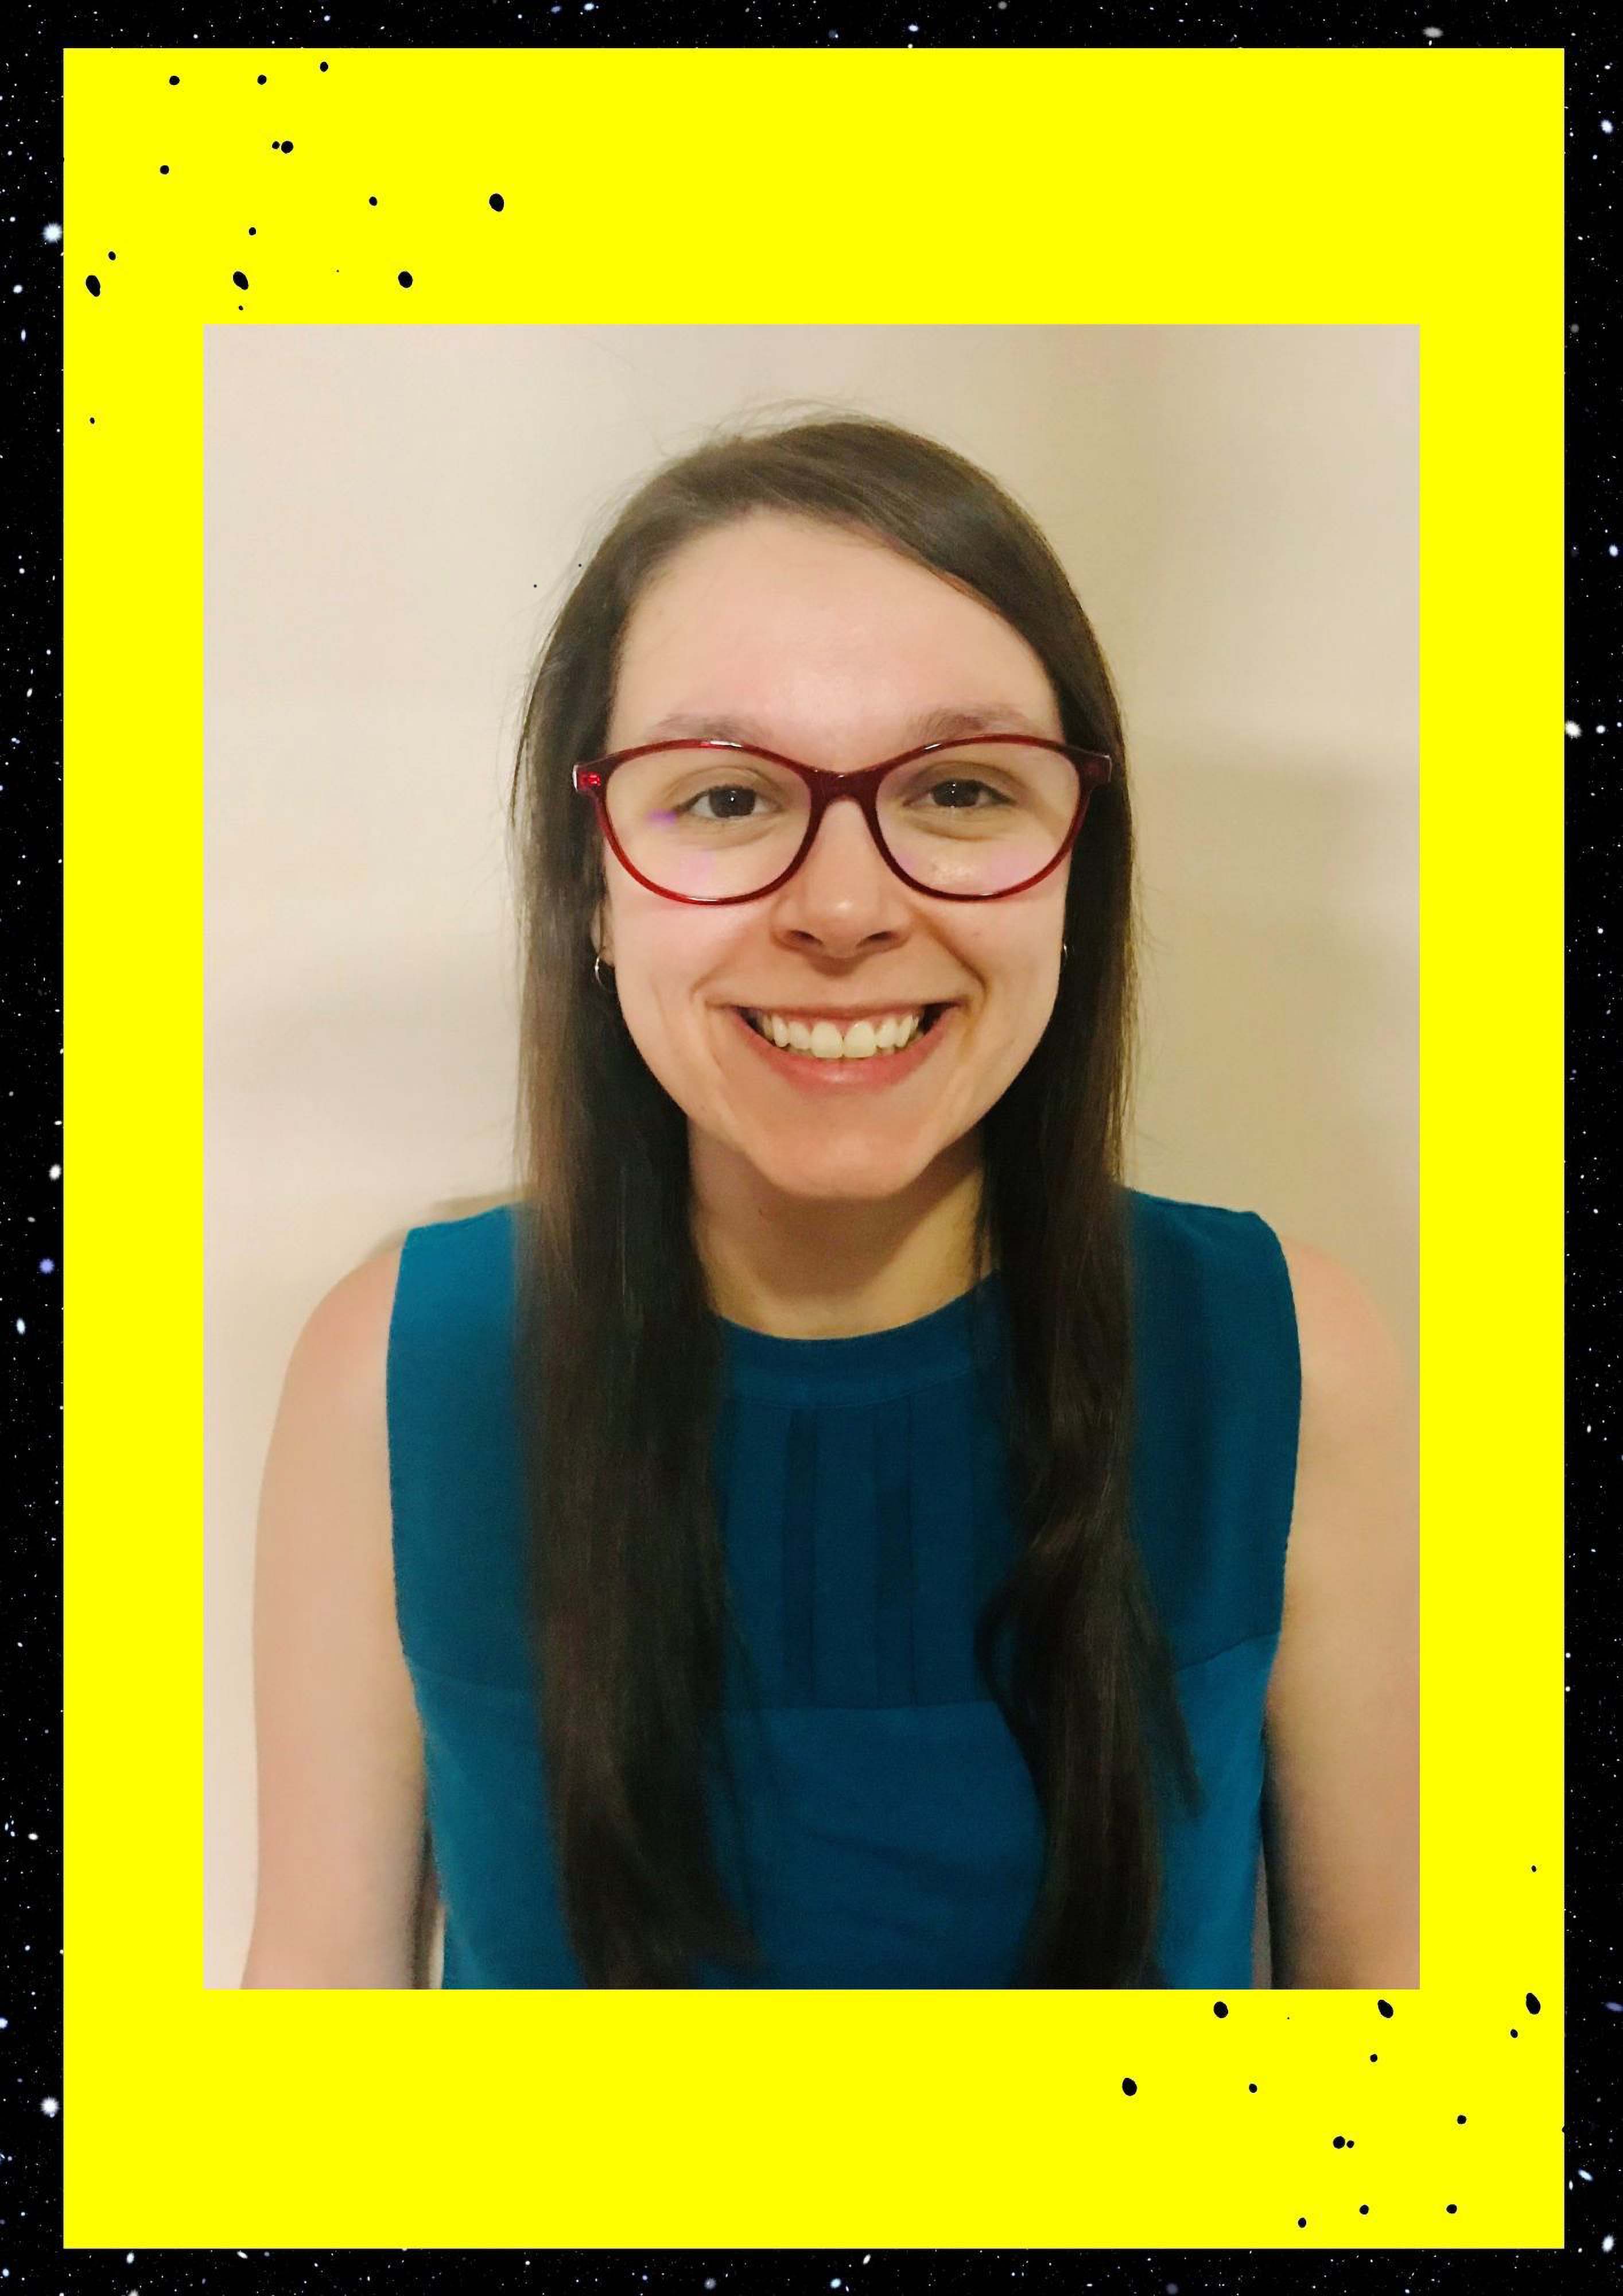 Danica smiles for a professional headshot. The headshot photo is outlined in a bright yellow frame. 